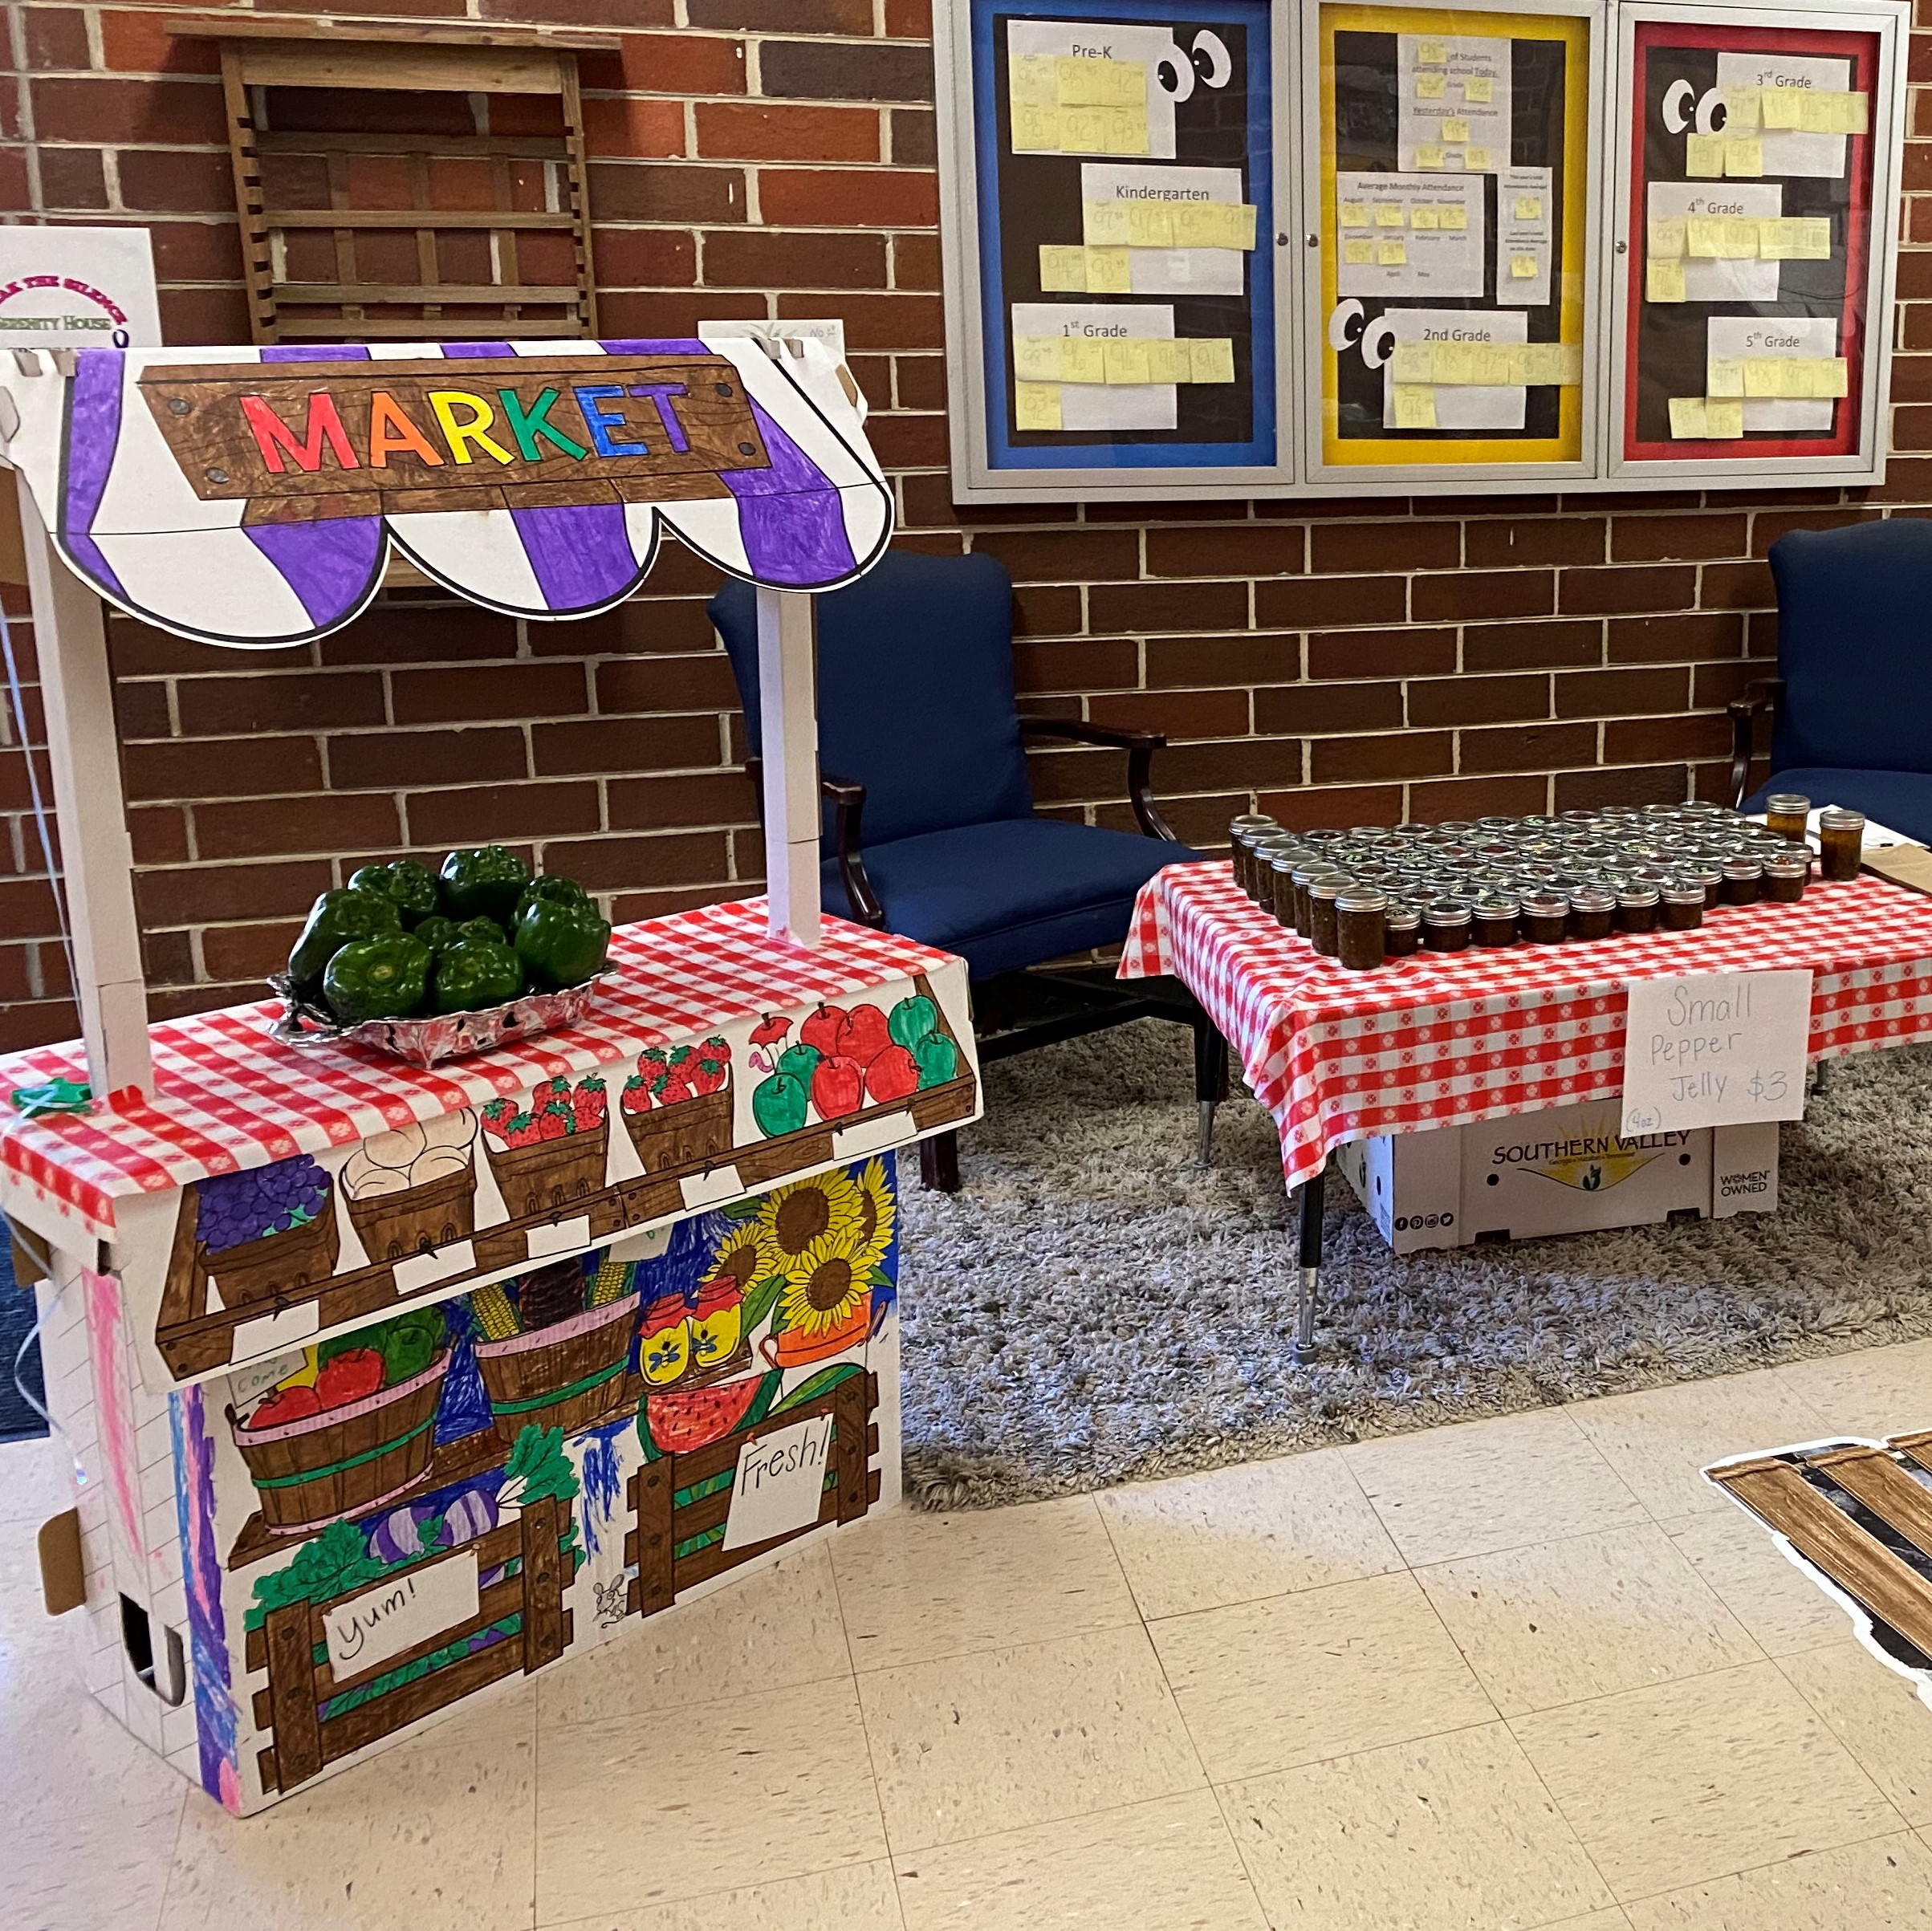 Host a Market Day at School!